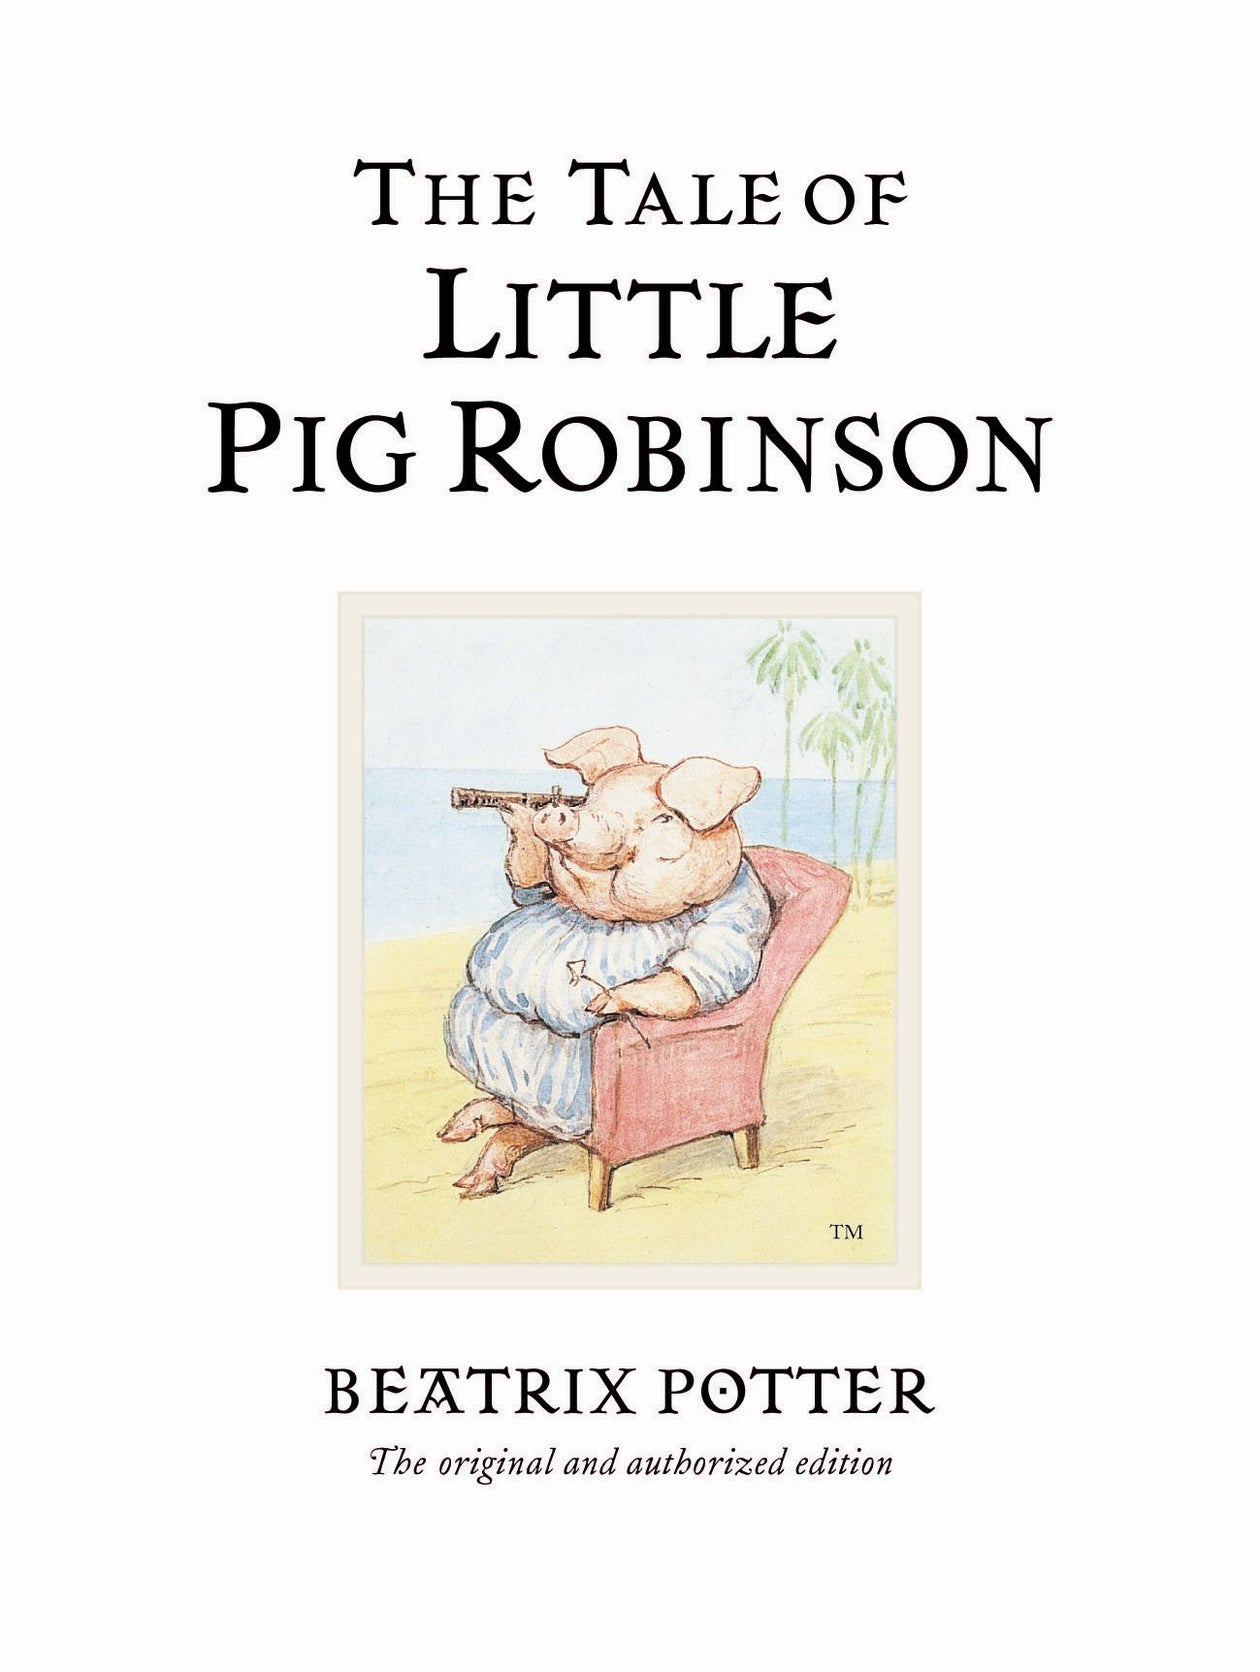 The Tale of Little Pig Robinson by Beatrix Potter